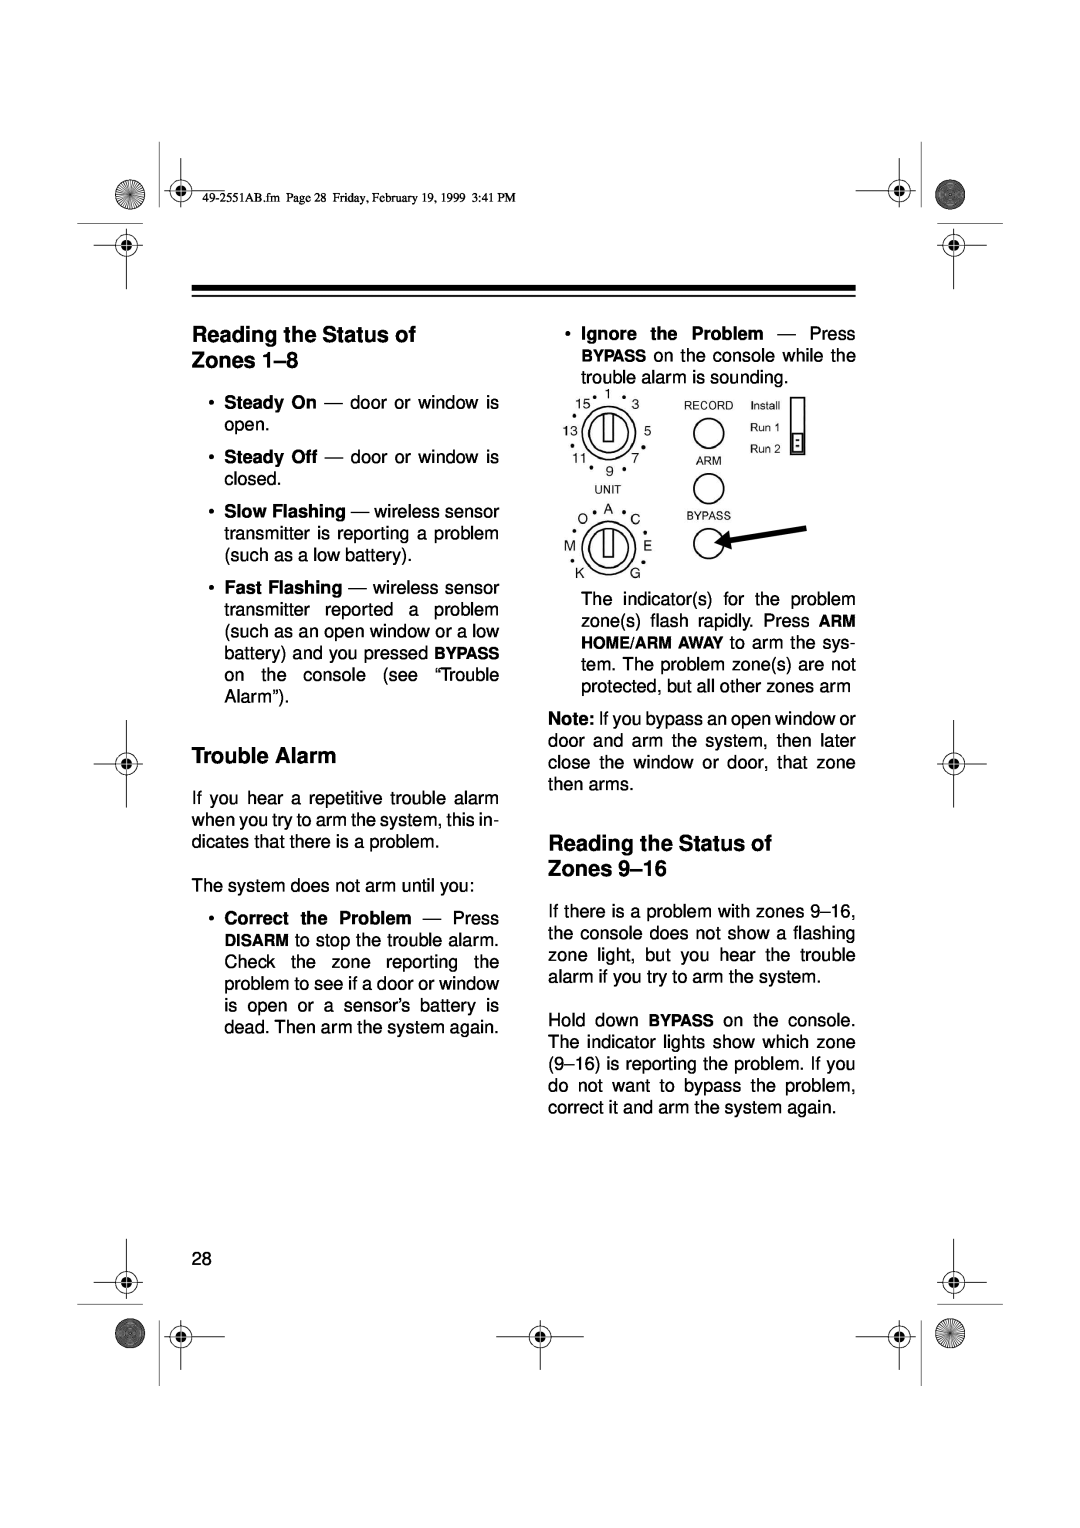 Radio Shack 49-2551A owner manual Reading the Status of Zones, Trouble Alarm 